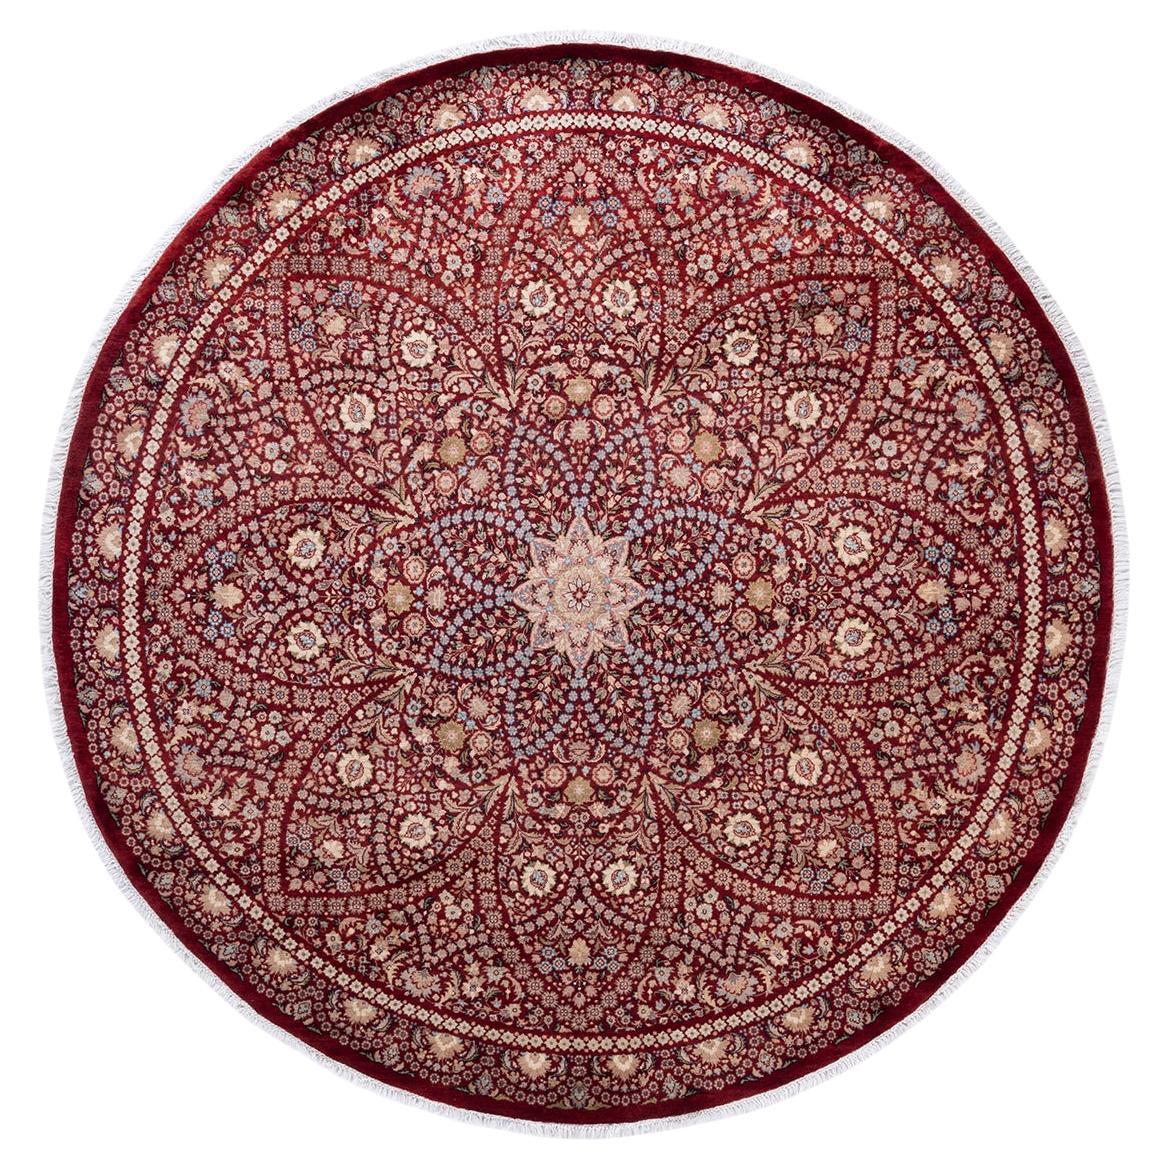 Traditional Mogul Hand Knotted Wool Red Round Area Rug 